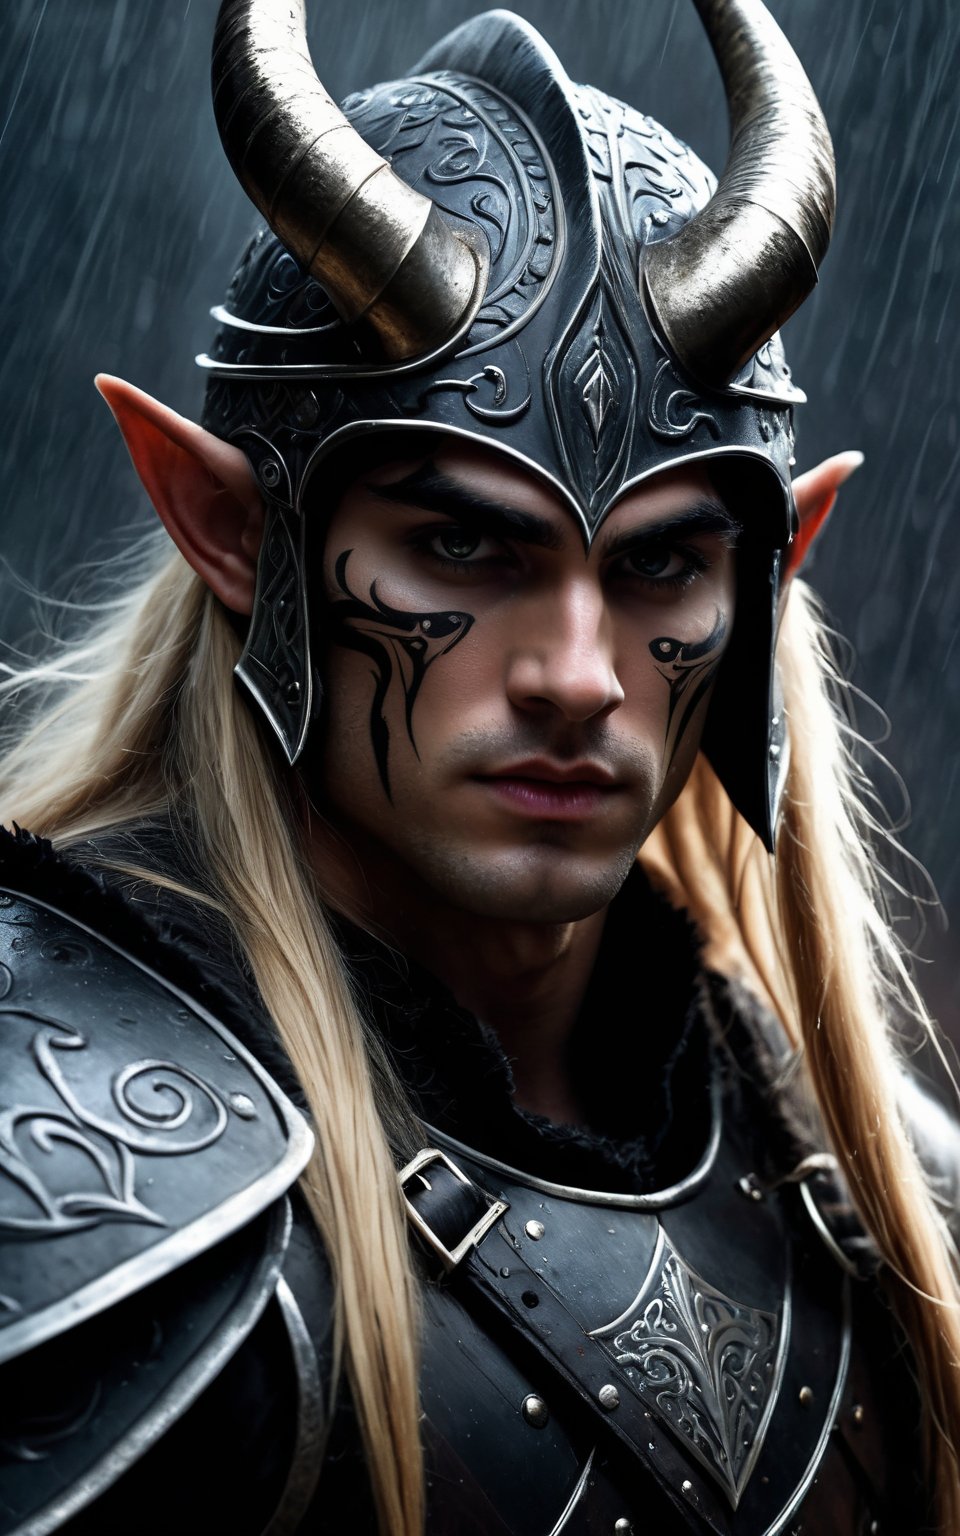 (high quality, digital art, fantasy character, dark and atmospheric), close-up portrait of a fierce warrior, male, wearing a horned helmet, long blonde hair, intense gaze, black face paint in tribal patterns, pointed elf-like ears, wearing dark and rugged armor, dimly lit, background with a gloomy and mystical atmosphere, rain falling, flickering firelight in the distance, shadows and dramatic lighting, detailed textures, high contrast, captivating and menacing expression, medieval and fantasy elements, cinematic composition, high resolution, intricate details.